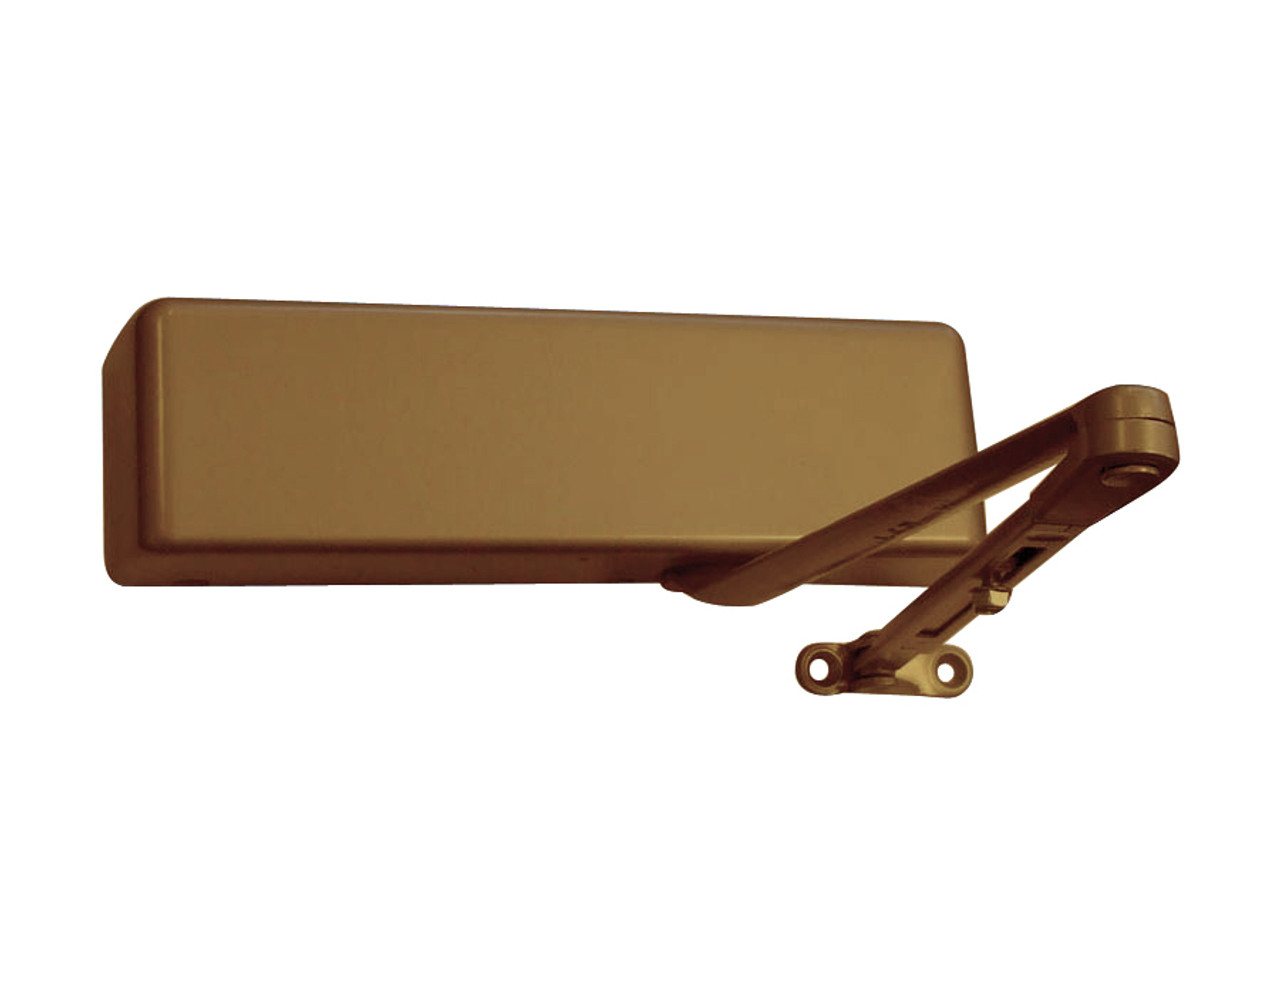 4026-FL-LH-STAT LCN Door Closer with Fusible Link in Statuary Finish